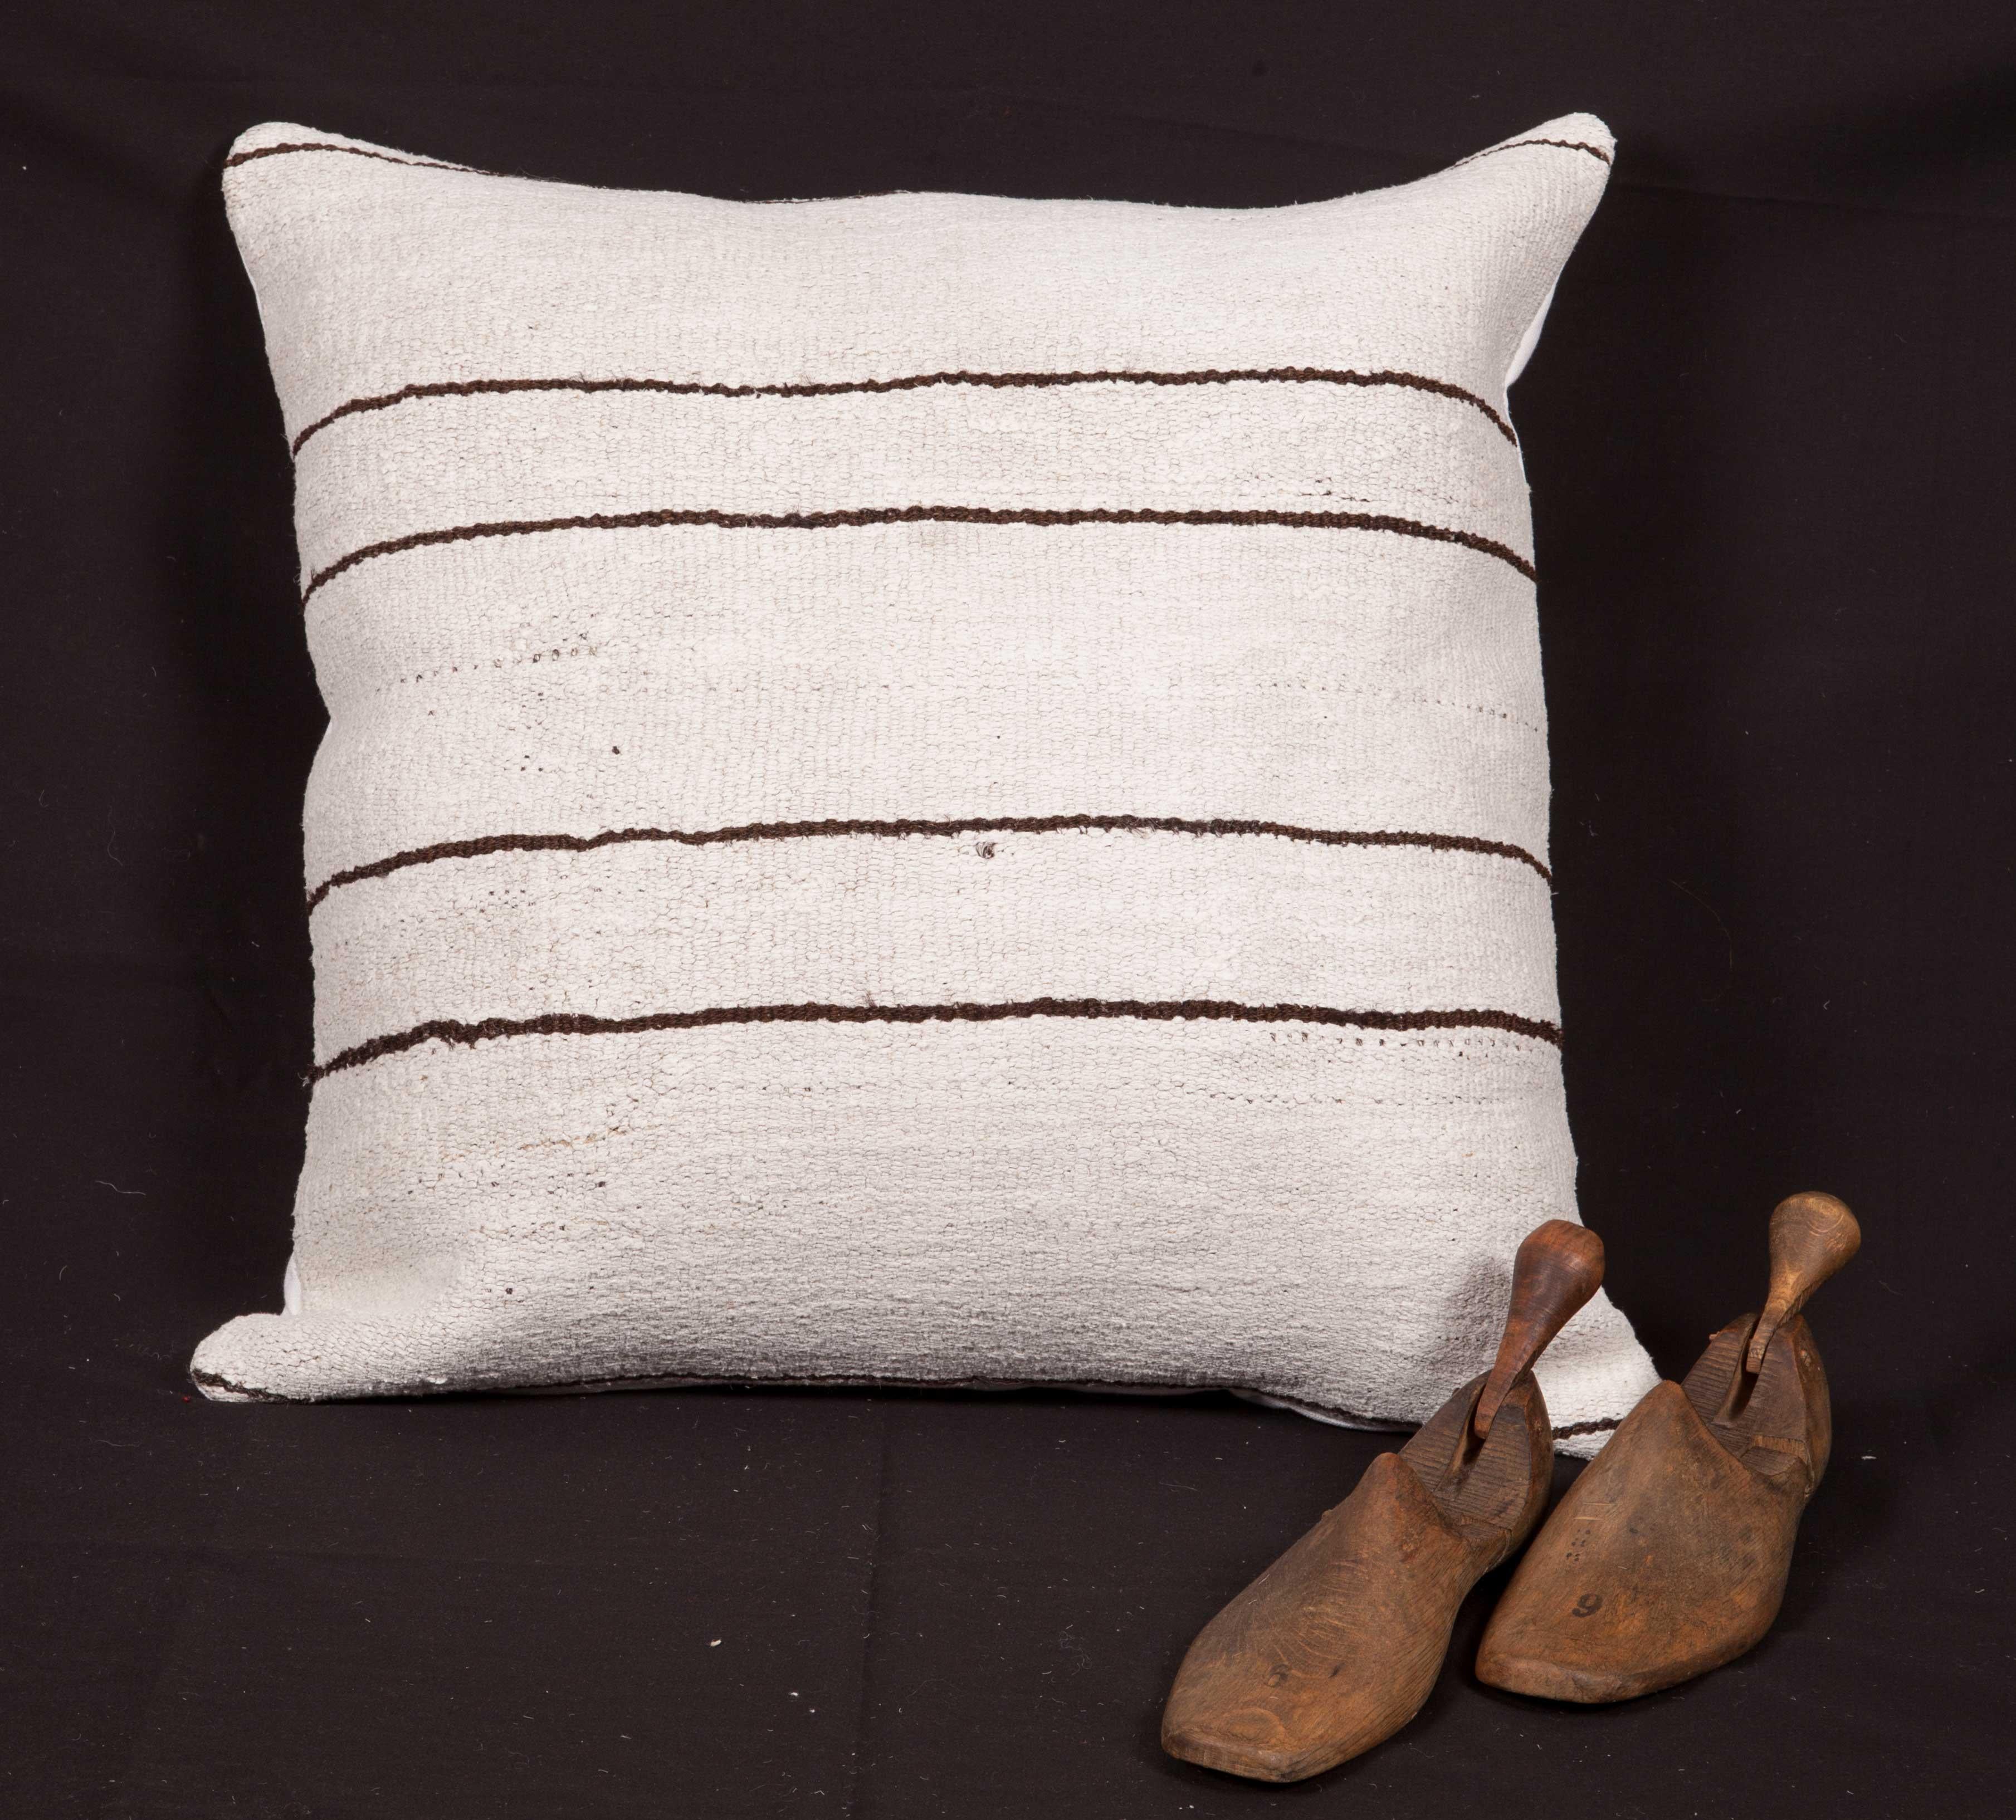 The pillow is made from a vintage Anatolian Hemp kilim. It does not come with an insert but comes with a bag made to the size and out of cotton to accommodate the filling. The backing is made of linen. Please note filling is not provided. Since the